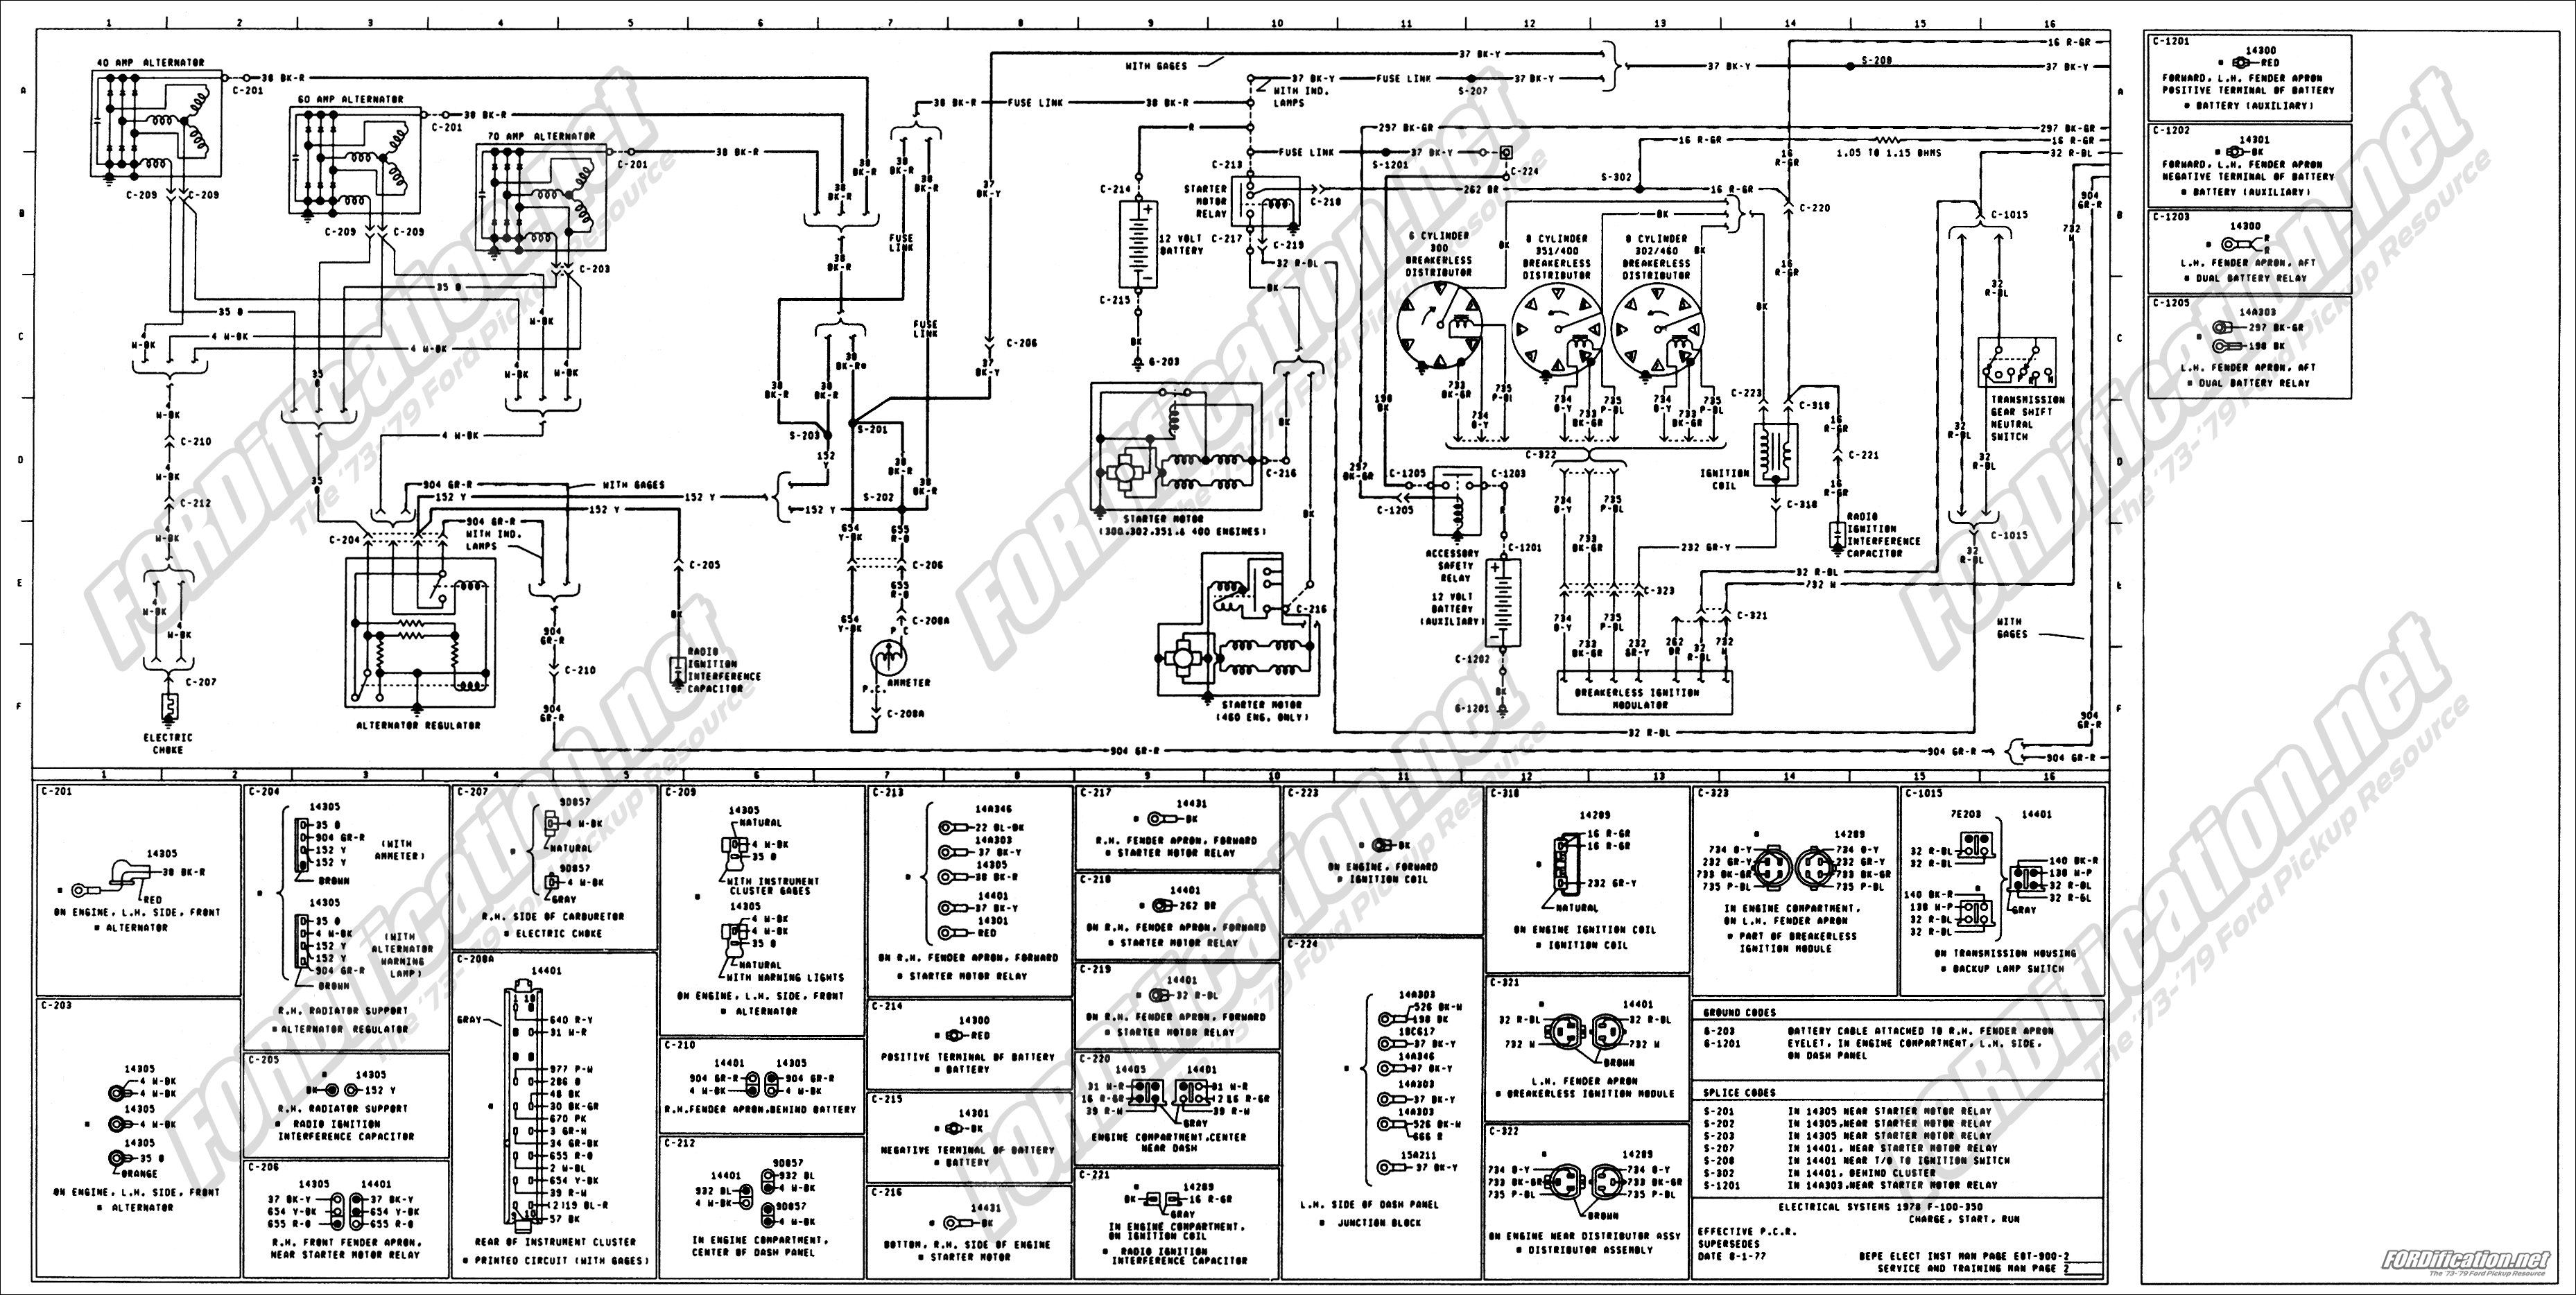 1970 F100 Ford Truck Wiring Diagrams